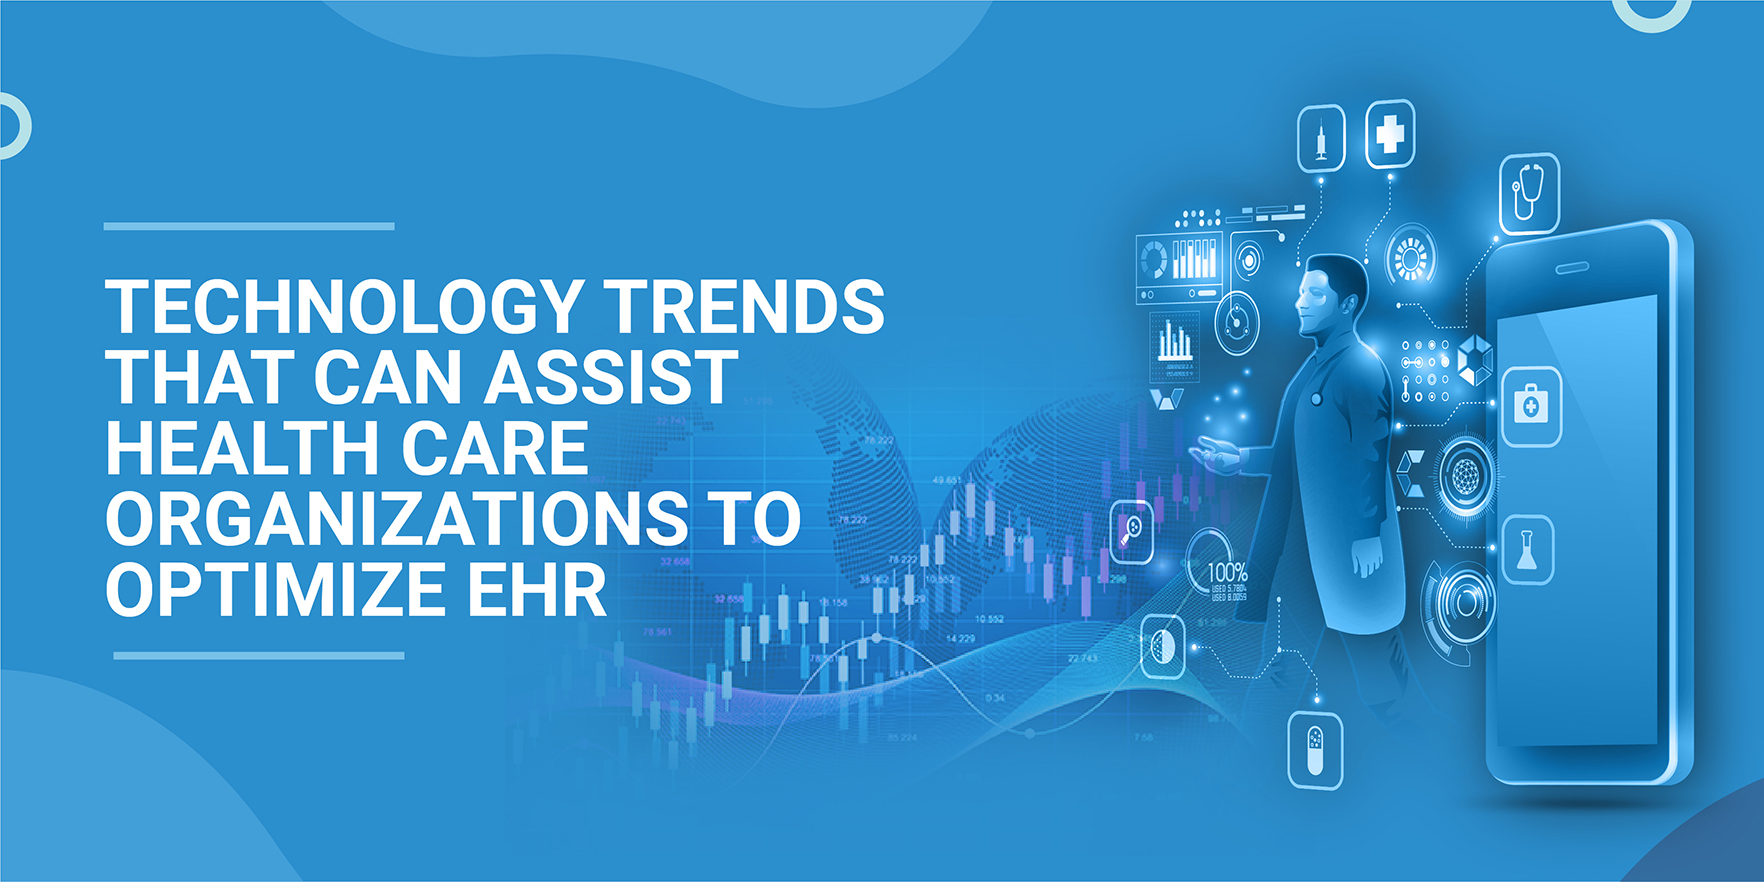 Technology Trends That can Assist Healthcare Organizations to Optimize EHR